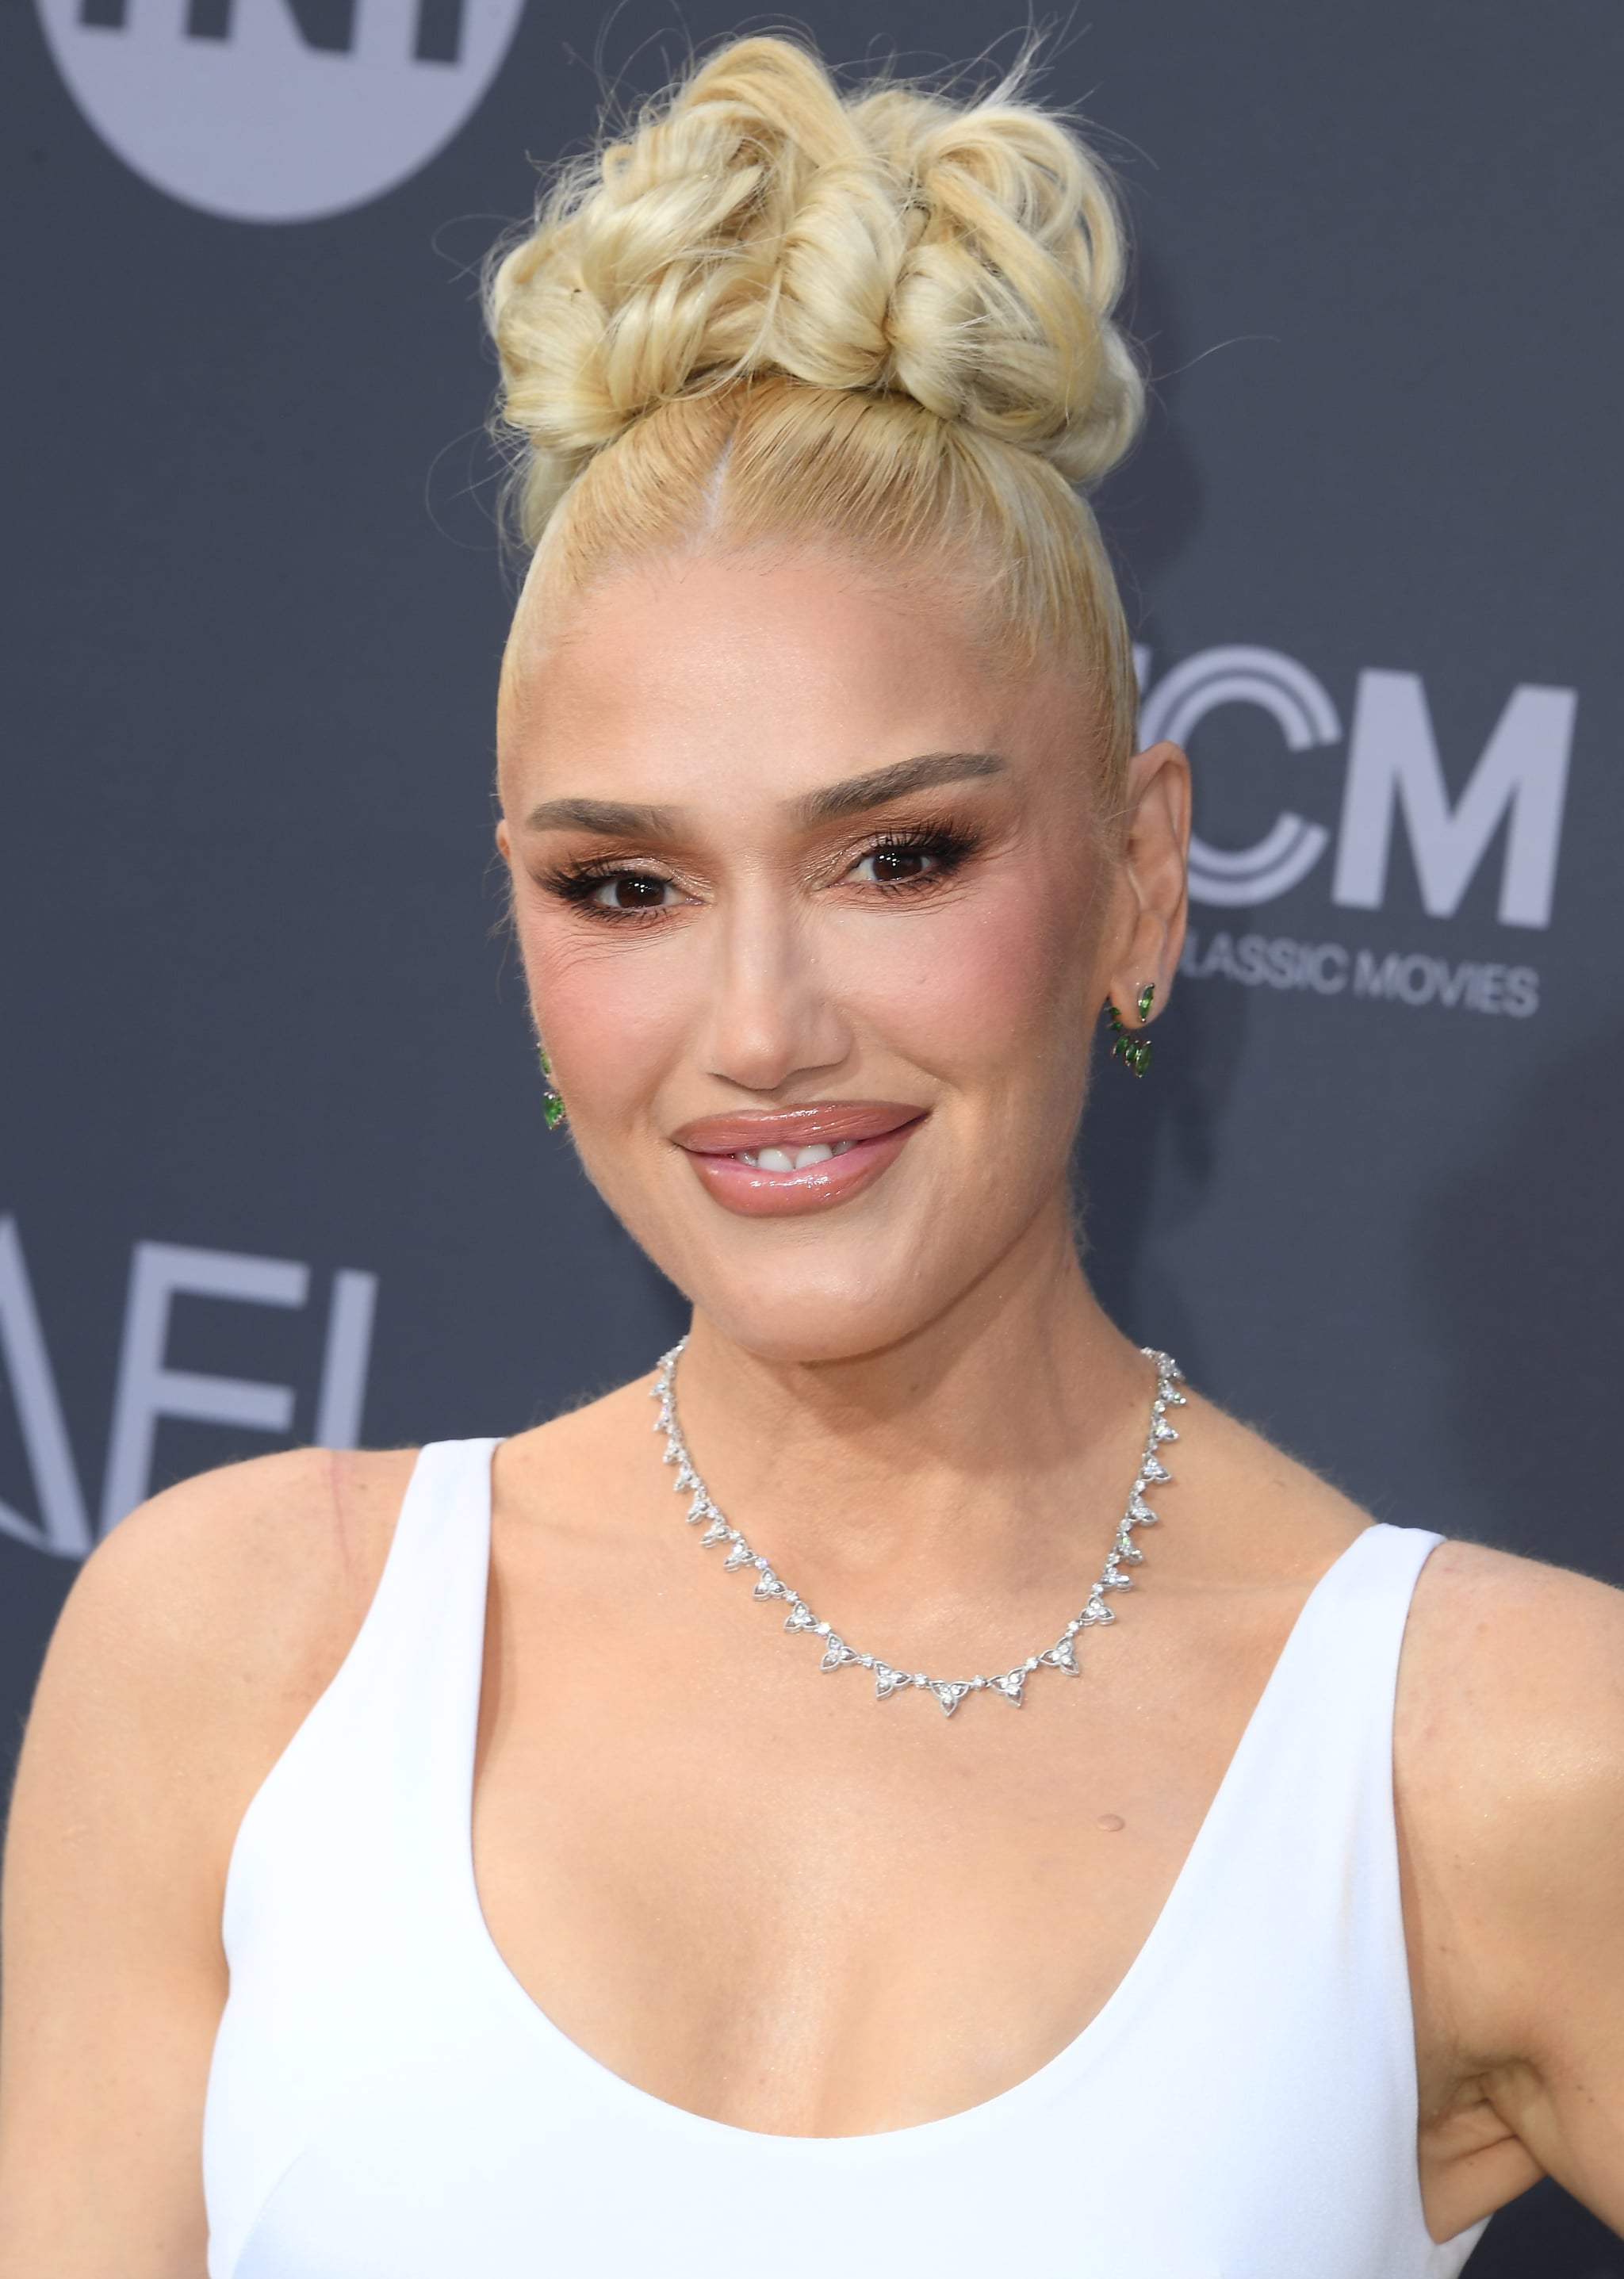 HOLLYWOOD, CALIFORNIA - JUNE 09: Gwen Stefani arrives at the 48th AFI Life Achievement Award Gala Tribute Celebrating Julie Andrews at Dolby Theatre on June 09, 2022 in Hollywood, California. (Photo by Steve Granitz/FilmMagic)